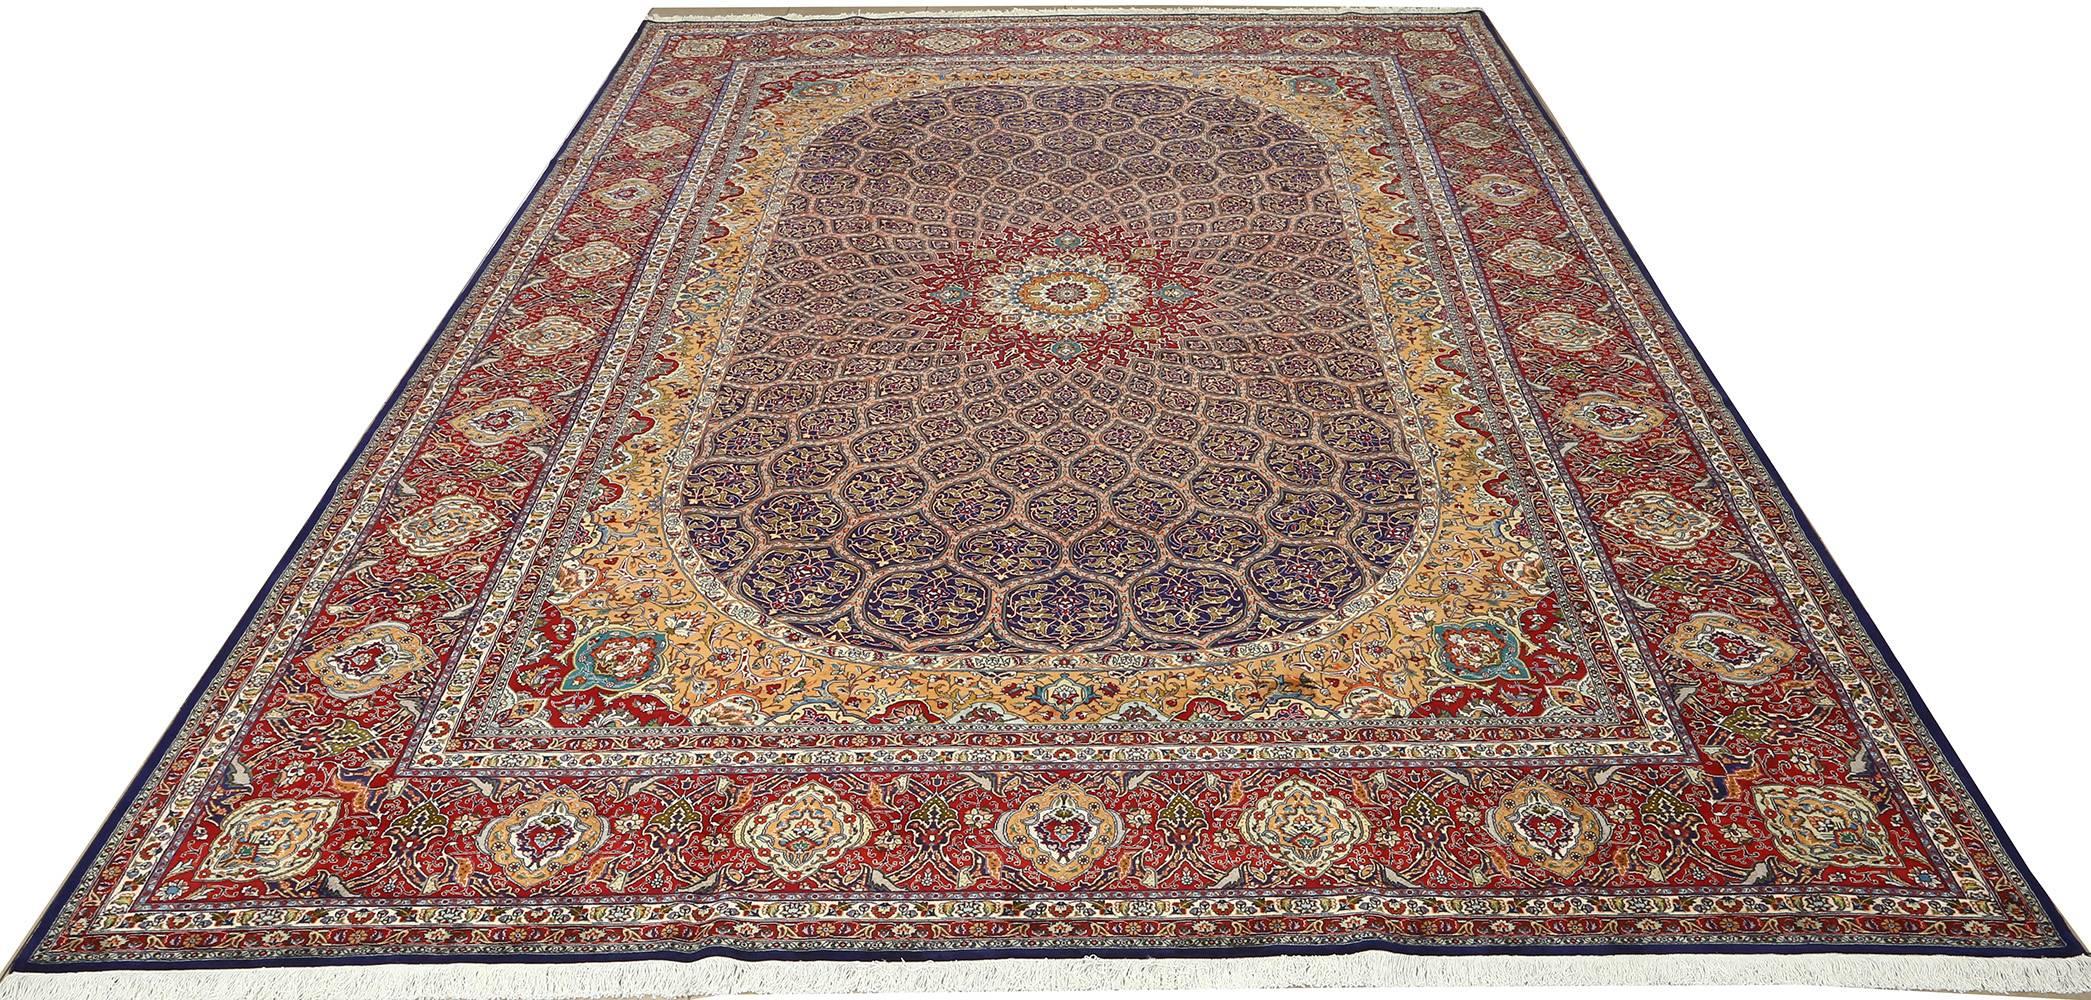 20th Century Nazmiyal Collection Vintage Tabriz Persian Rug. Size: 11 ft 11 in x 16 ft 3 in 